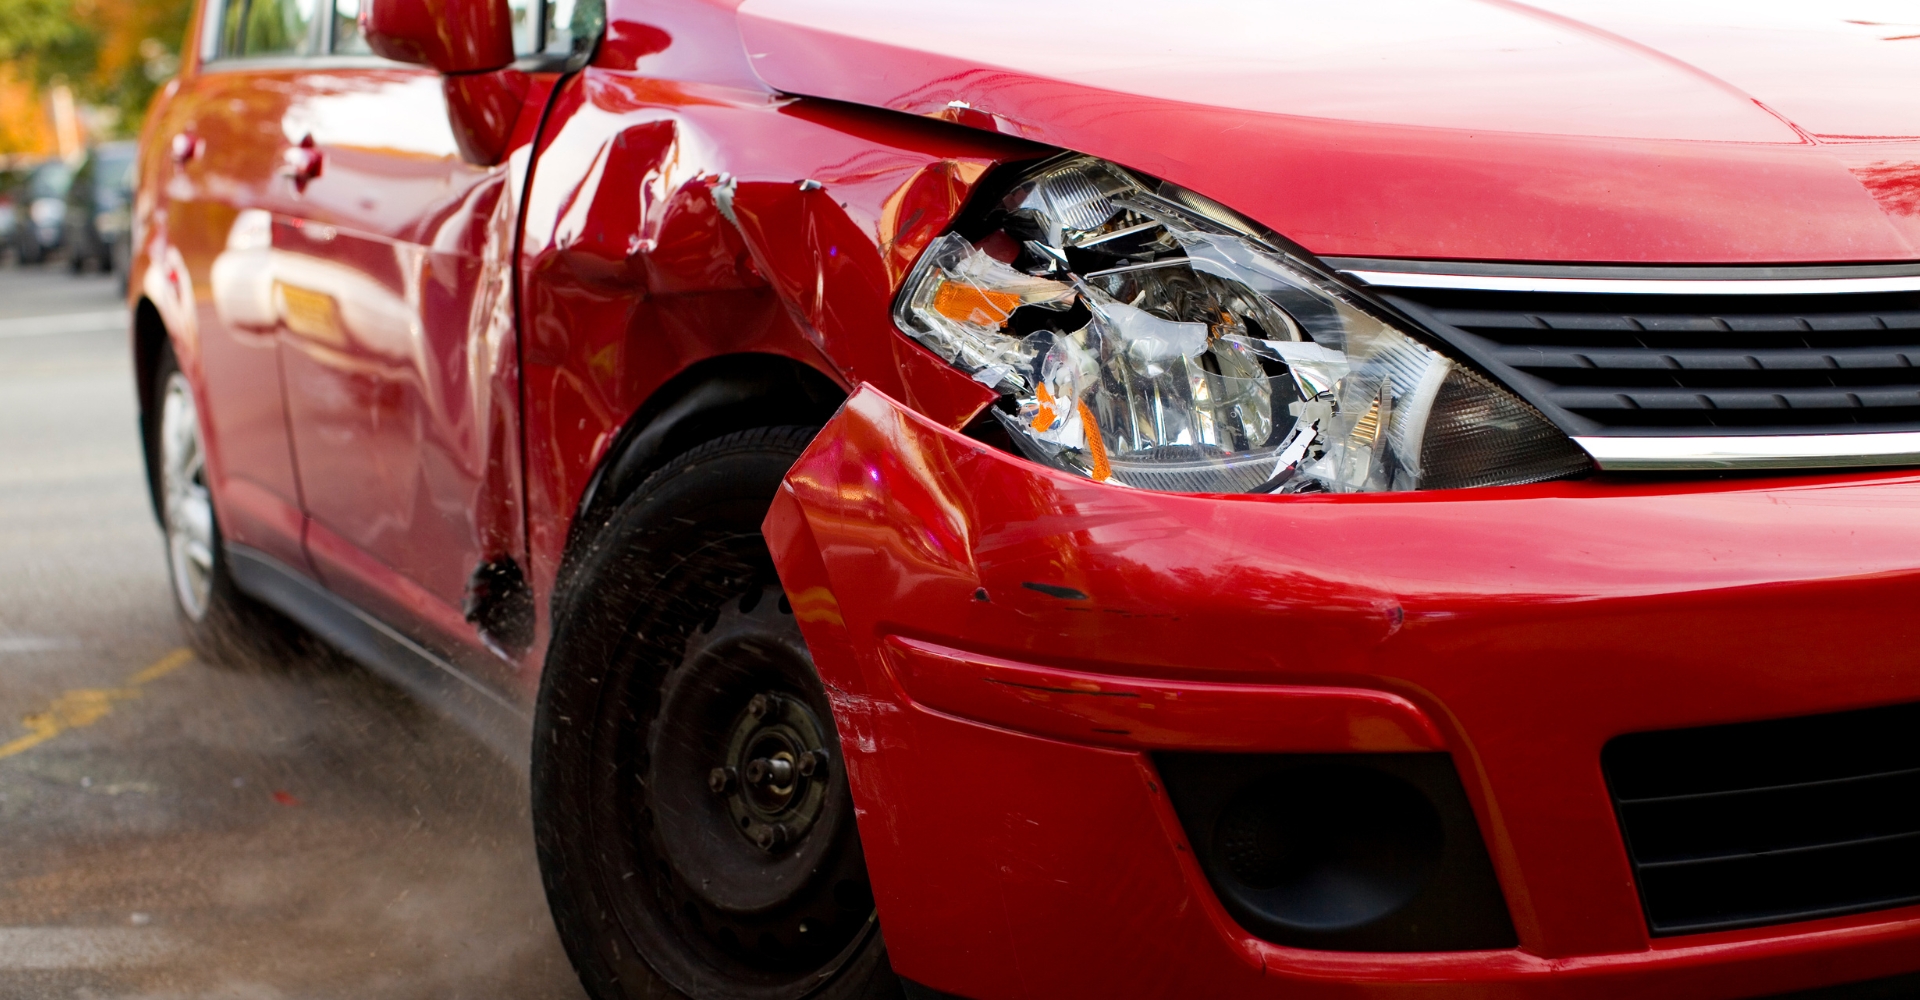 What To Do If You’ve Been Hurt In A Car Accident